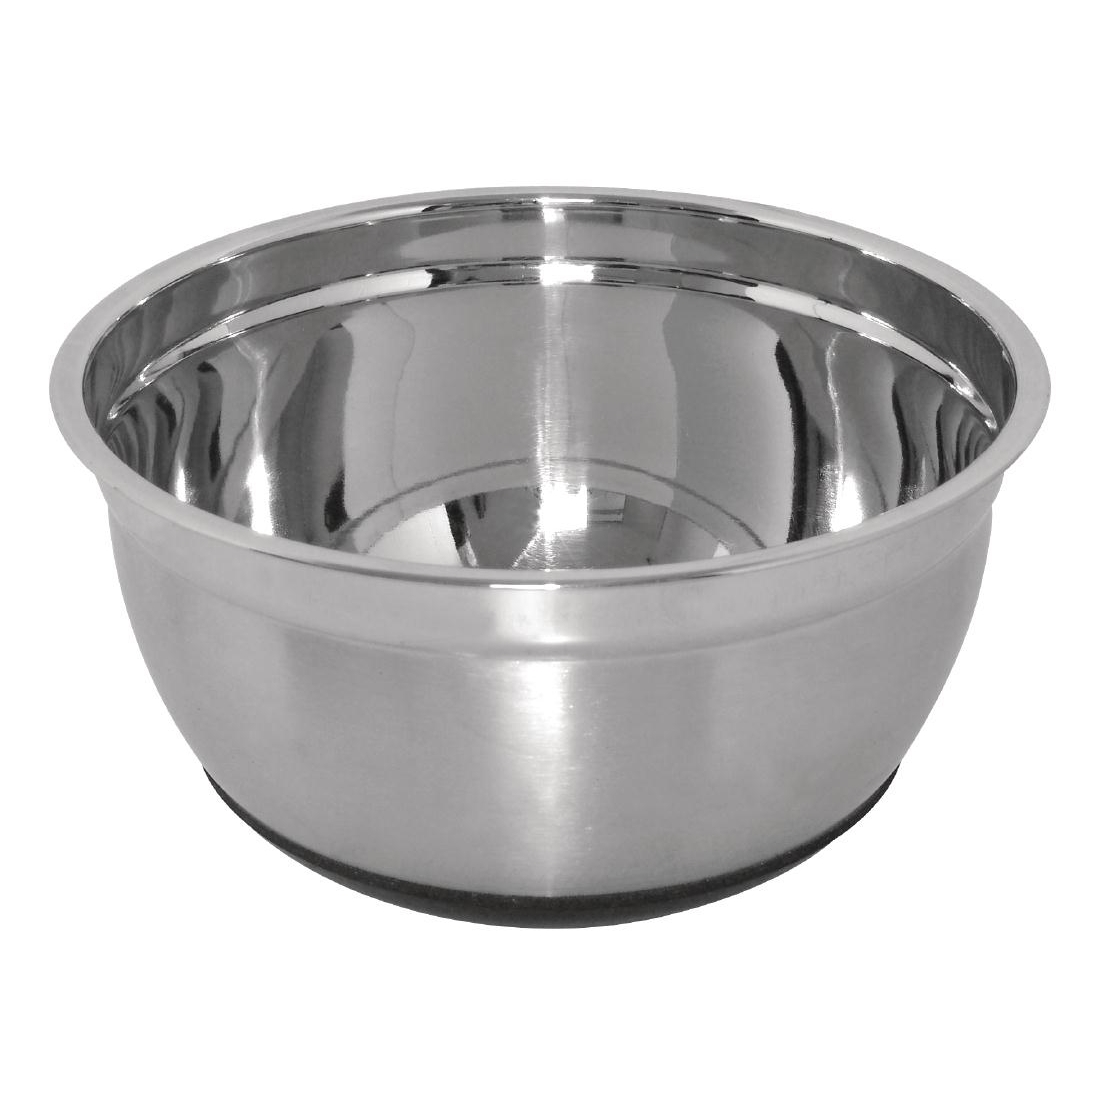 Vogue Stainless Steel Bowl with Silicone Base 8Ltr